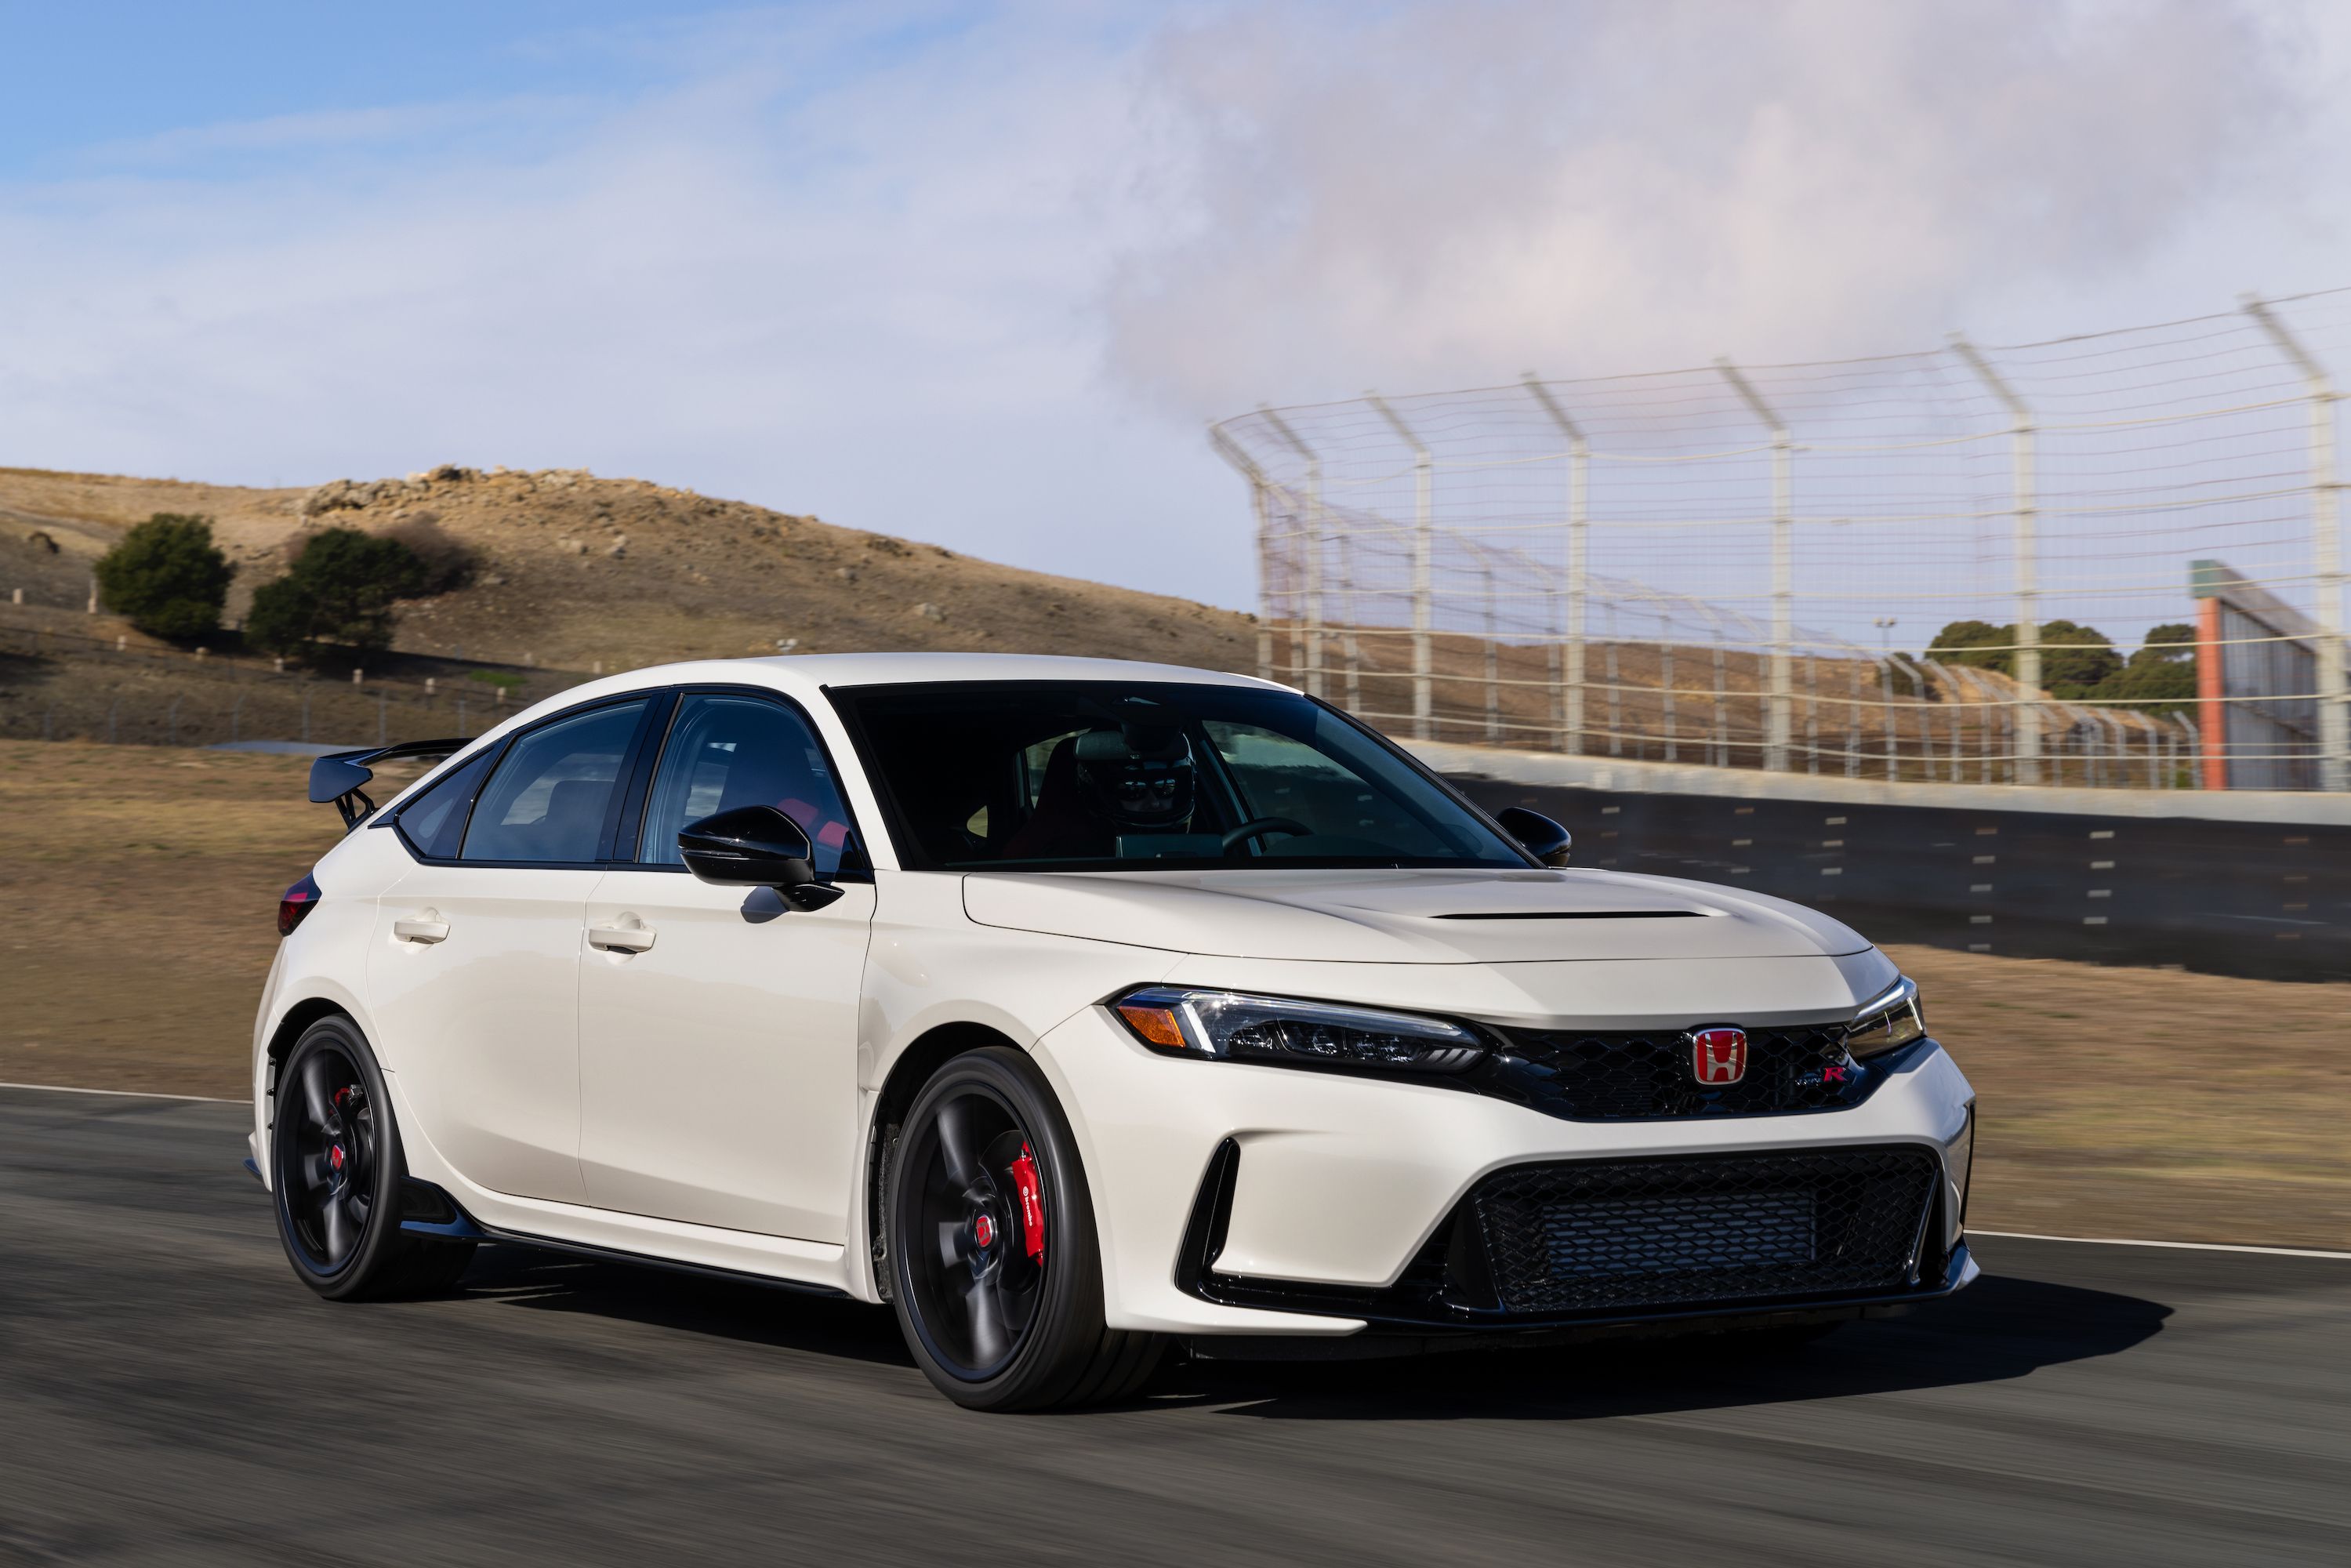 New Honda Civic Type R review: Is it really better? 